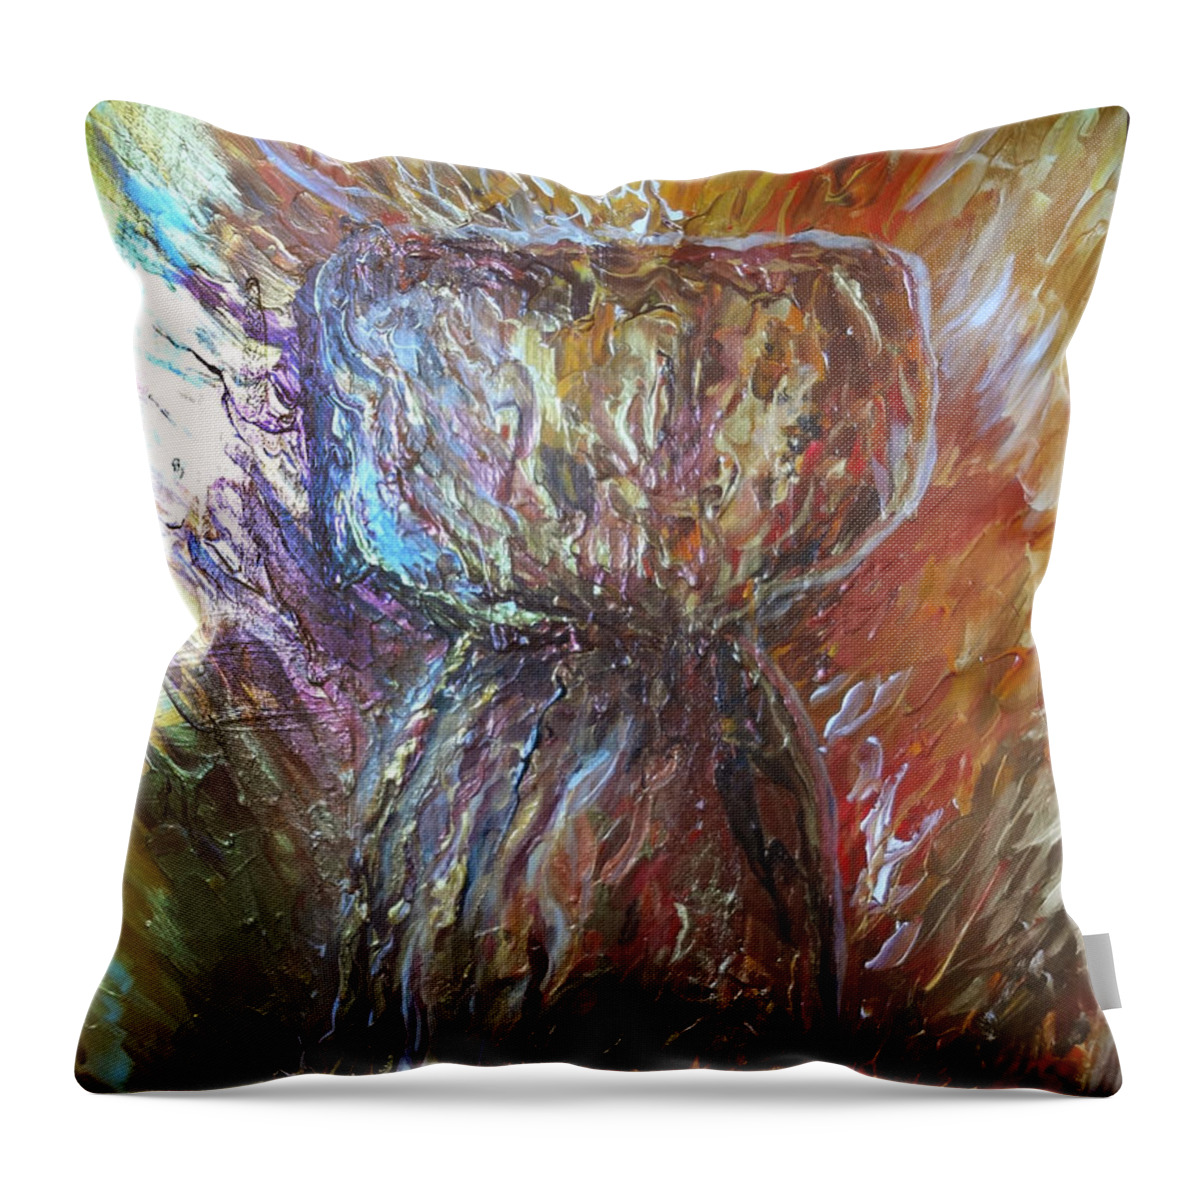 Fiery Throw Pillow featuring the painting Fiery Earth Latte Stone by Michelle Pier